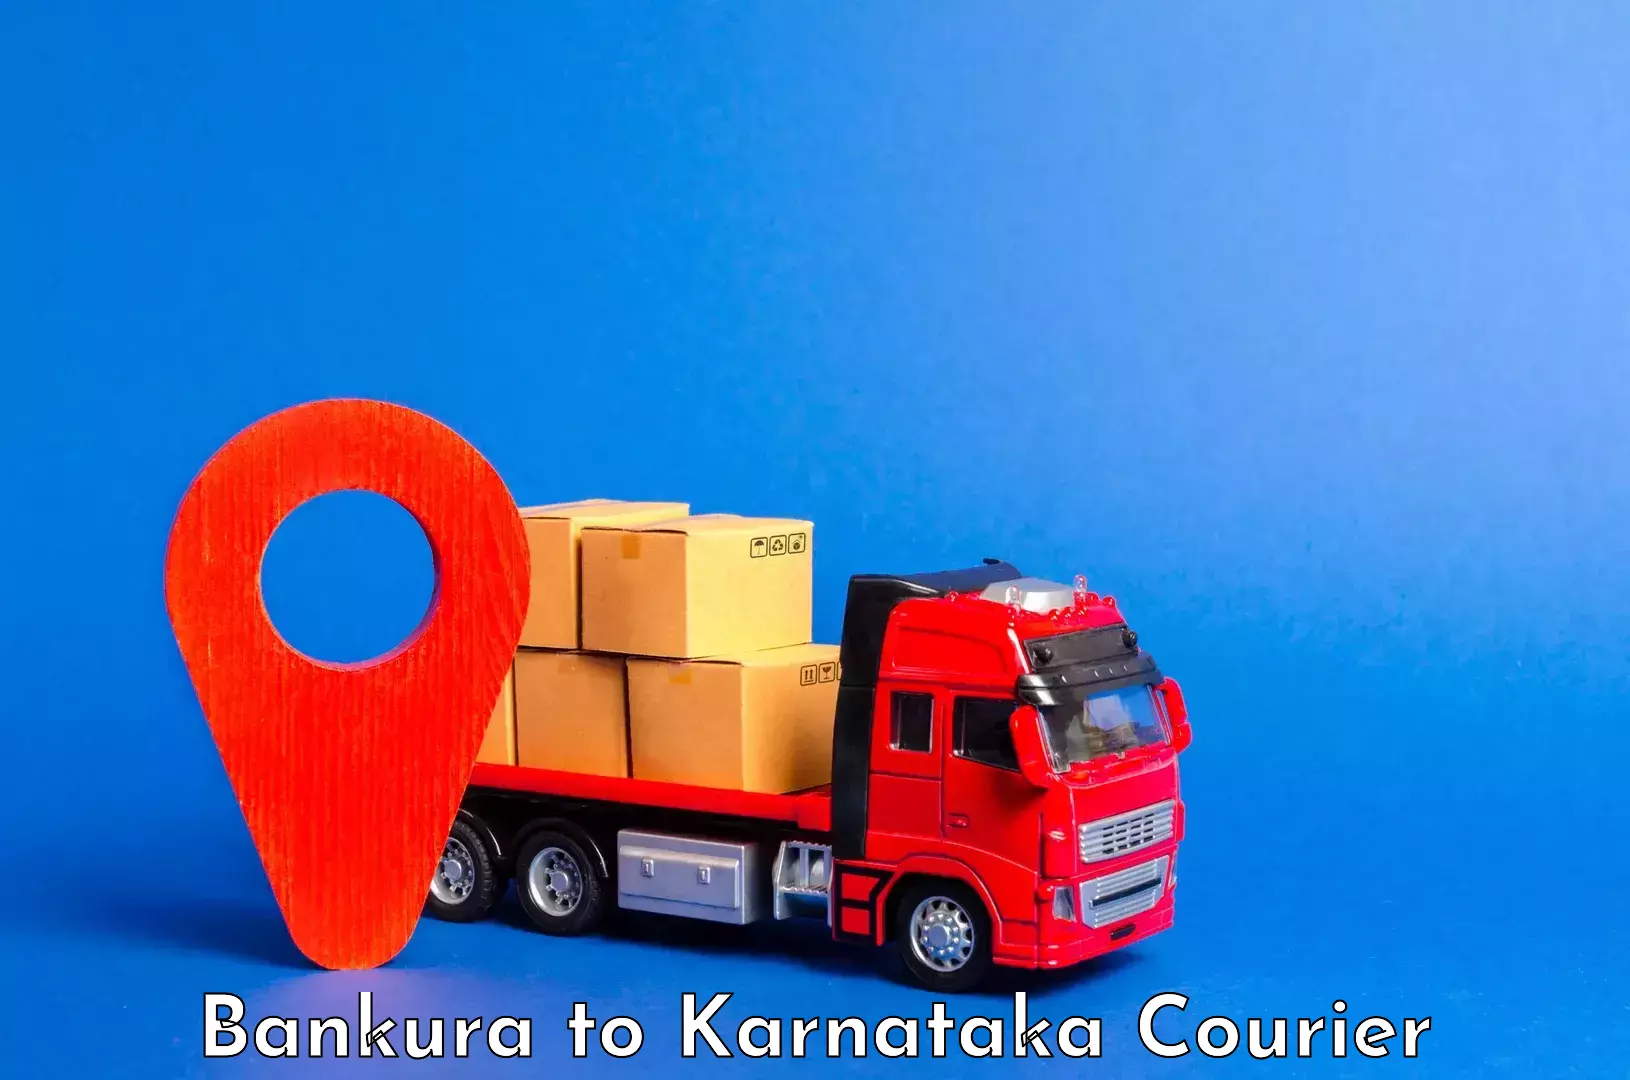 Luggage transport consultancy Bankura to Channapatna